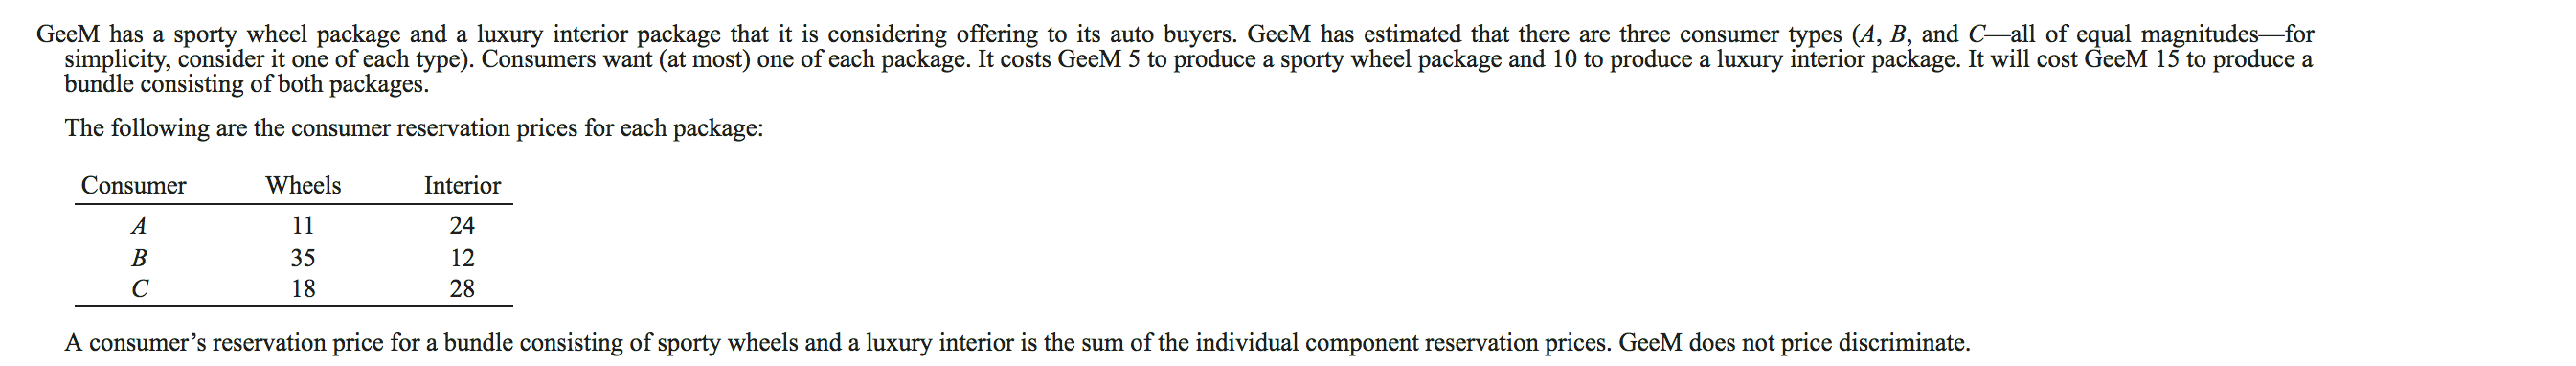 GeeM has a sporty wheel package and a luxury interior package that it is considering offering to its auto buyers. GeeM has estimated that there are three consumer types (A, B, and C-all of equal magnitudes--for
simplicity, consider it one of each type). Consumers want (at most) one of each package. It costs GeeM 5 to produce a sporty wheel package and 10 to produce a luxury interior package. It will cost GeeM 15 to produce a
bundle consisting of both packages.
The following are the consumer reservation prices for each package:
Wheels
Consumer
Interior
A
11
24
В
35
12
С
18
28
A consumer's reservation price for a bundle consisting of sporty wheels and a luxury interior is the sum of the individual component reservation prices. GeeM does not price discriminate
